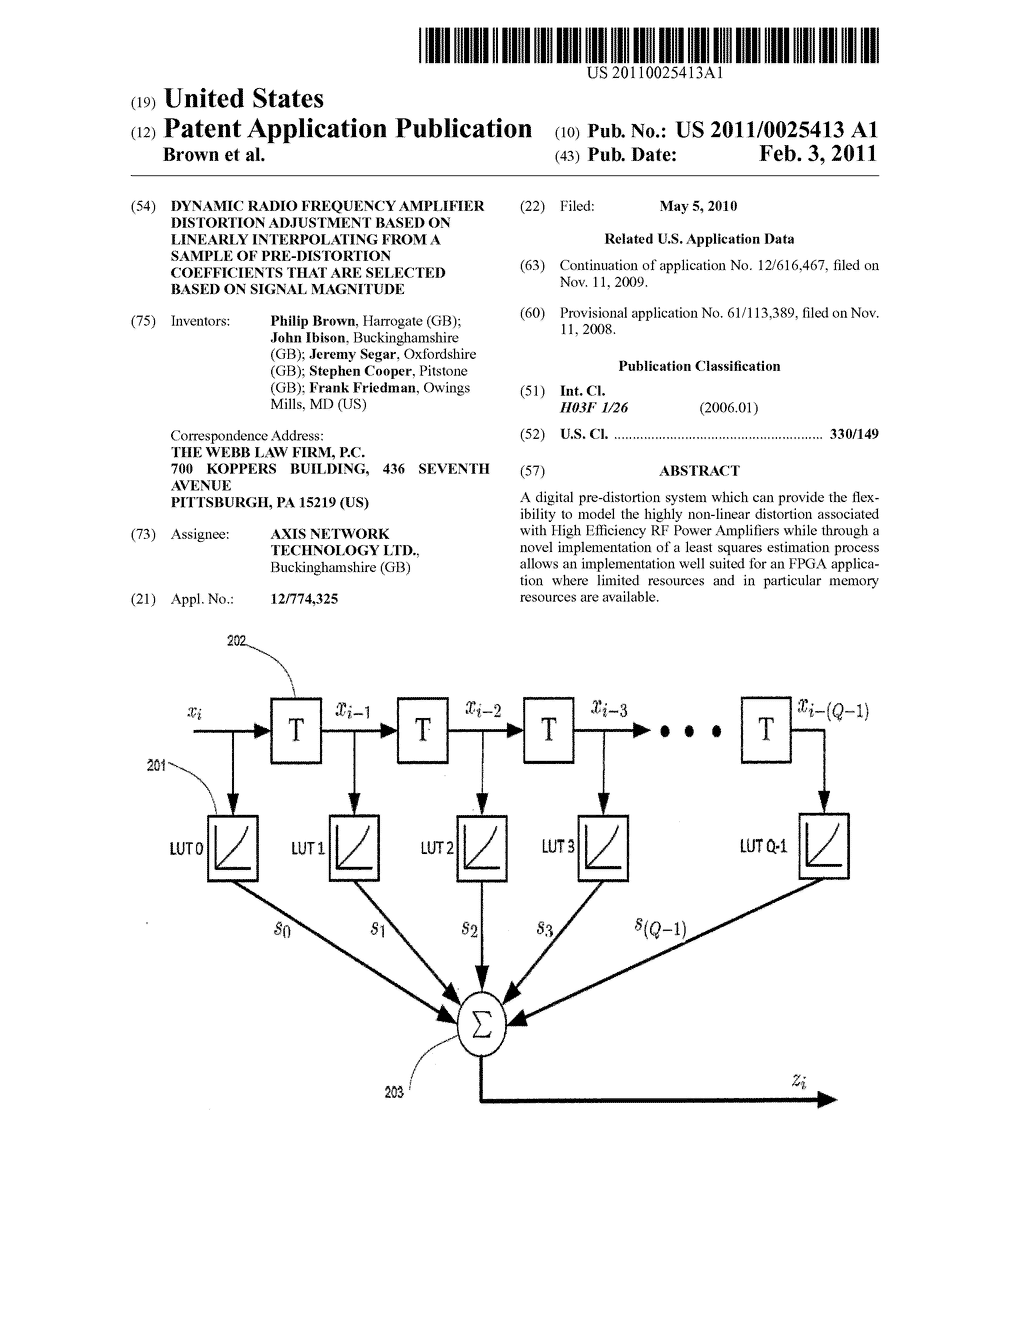 Dynamic Radio Frequency Amplifier Distortion Adjustment Based on Linearly Interpolating from a Sample of Pre-Distortion Coefficients that are Selected Based on Signal Magnitude - diagram, schematic, and image 01